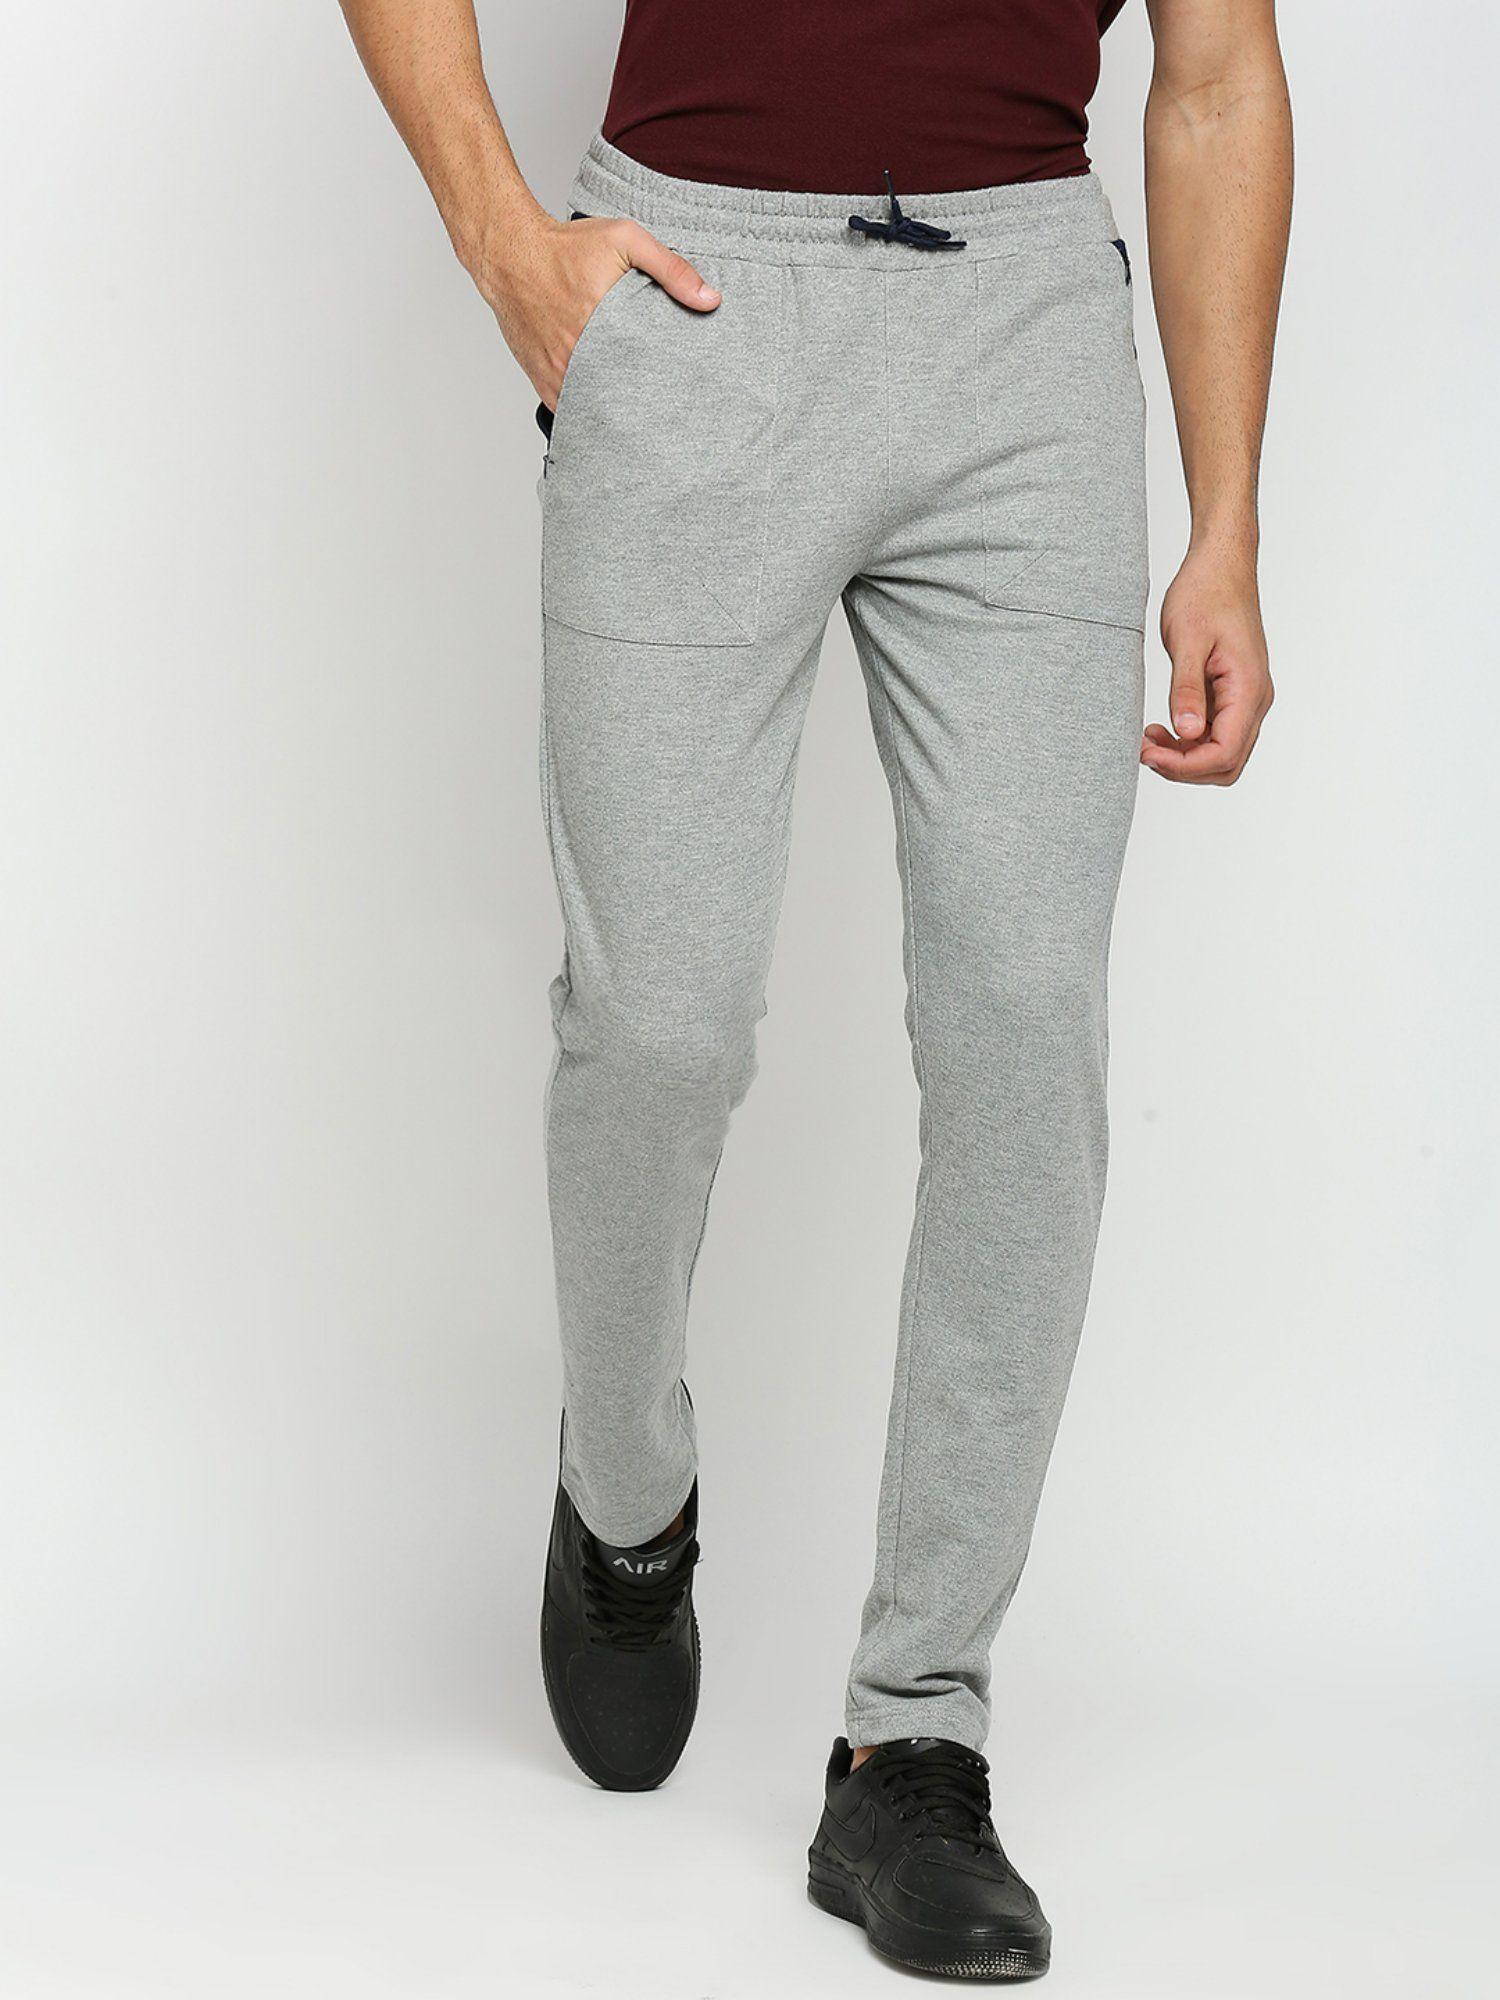 cotton polyester slim fit french terry knit joggers for mens - grey